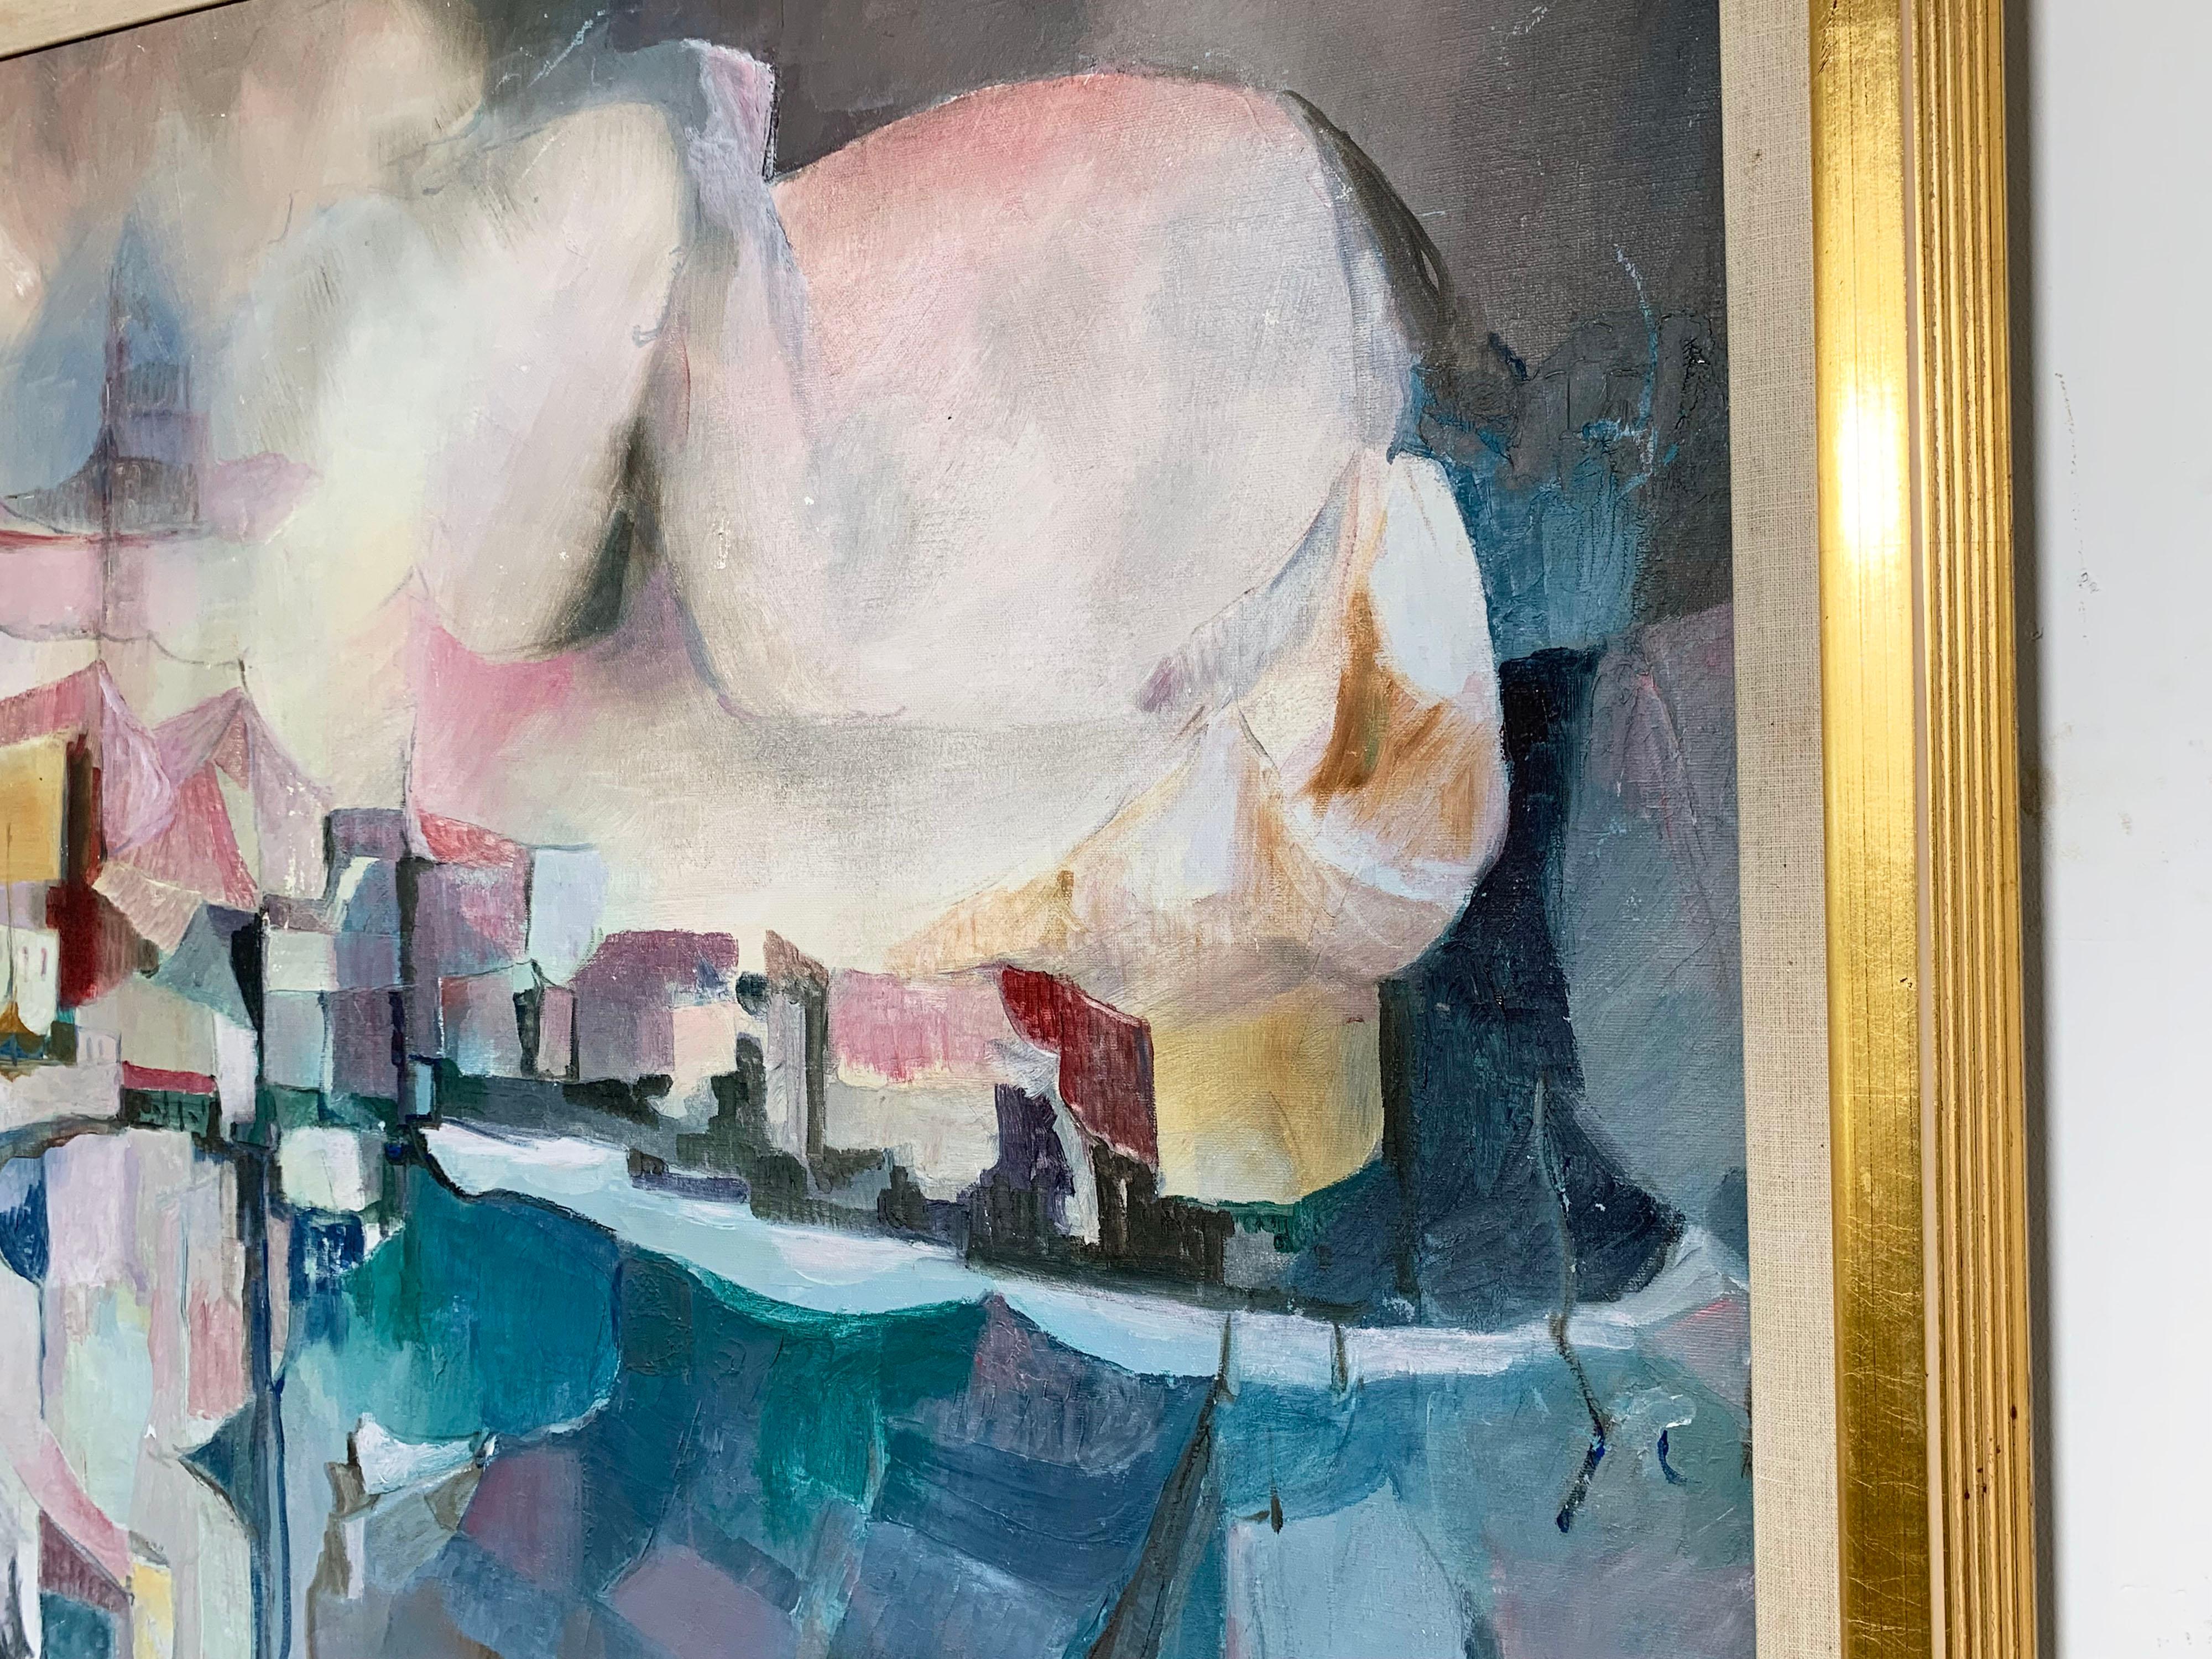 A large scale abstract seascape painting, possibly Montevideo, oil on canvas, by the Uruguayan artist Carlos Perez Franco (1929-2015). 

Perez Franco exhibited throughout North and South America from the 1960s until earlier this century, and